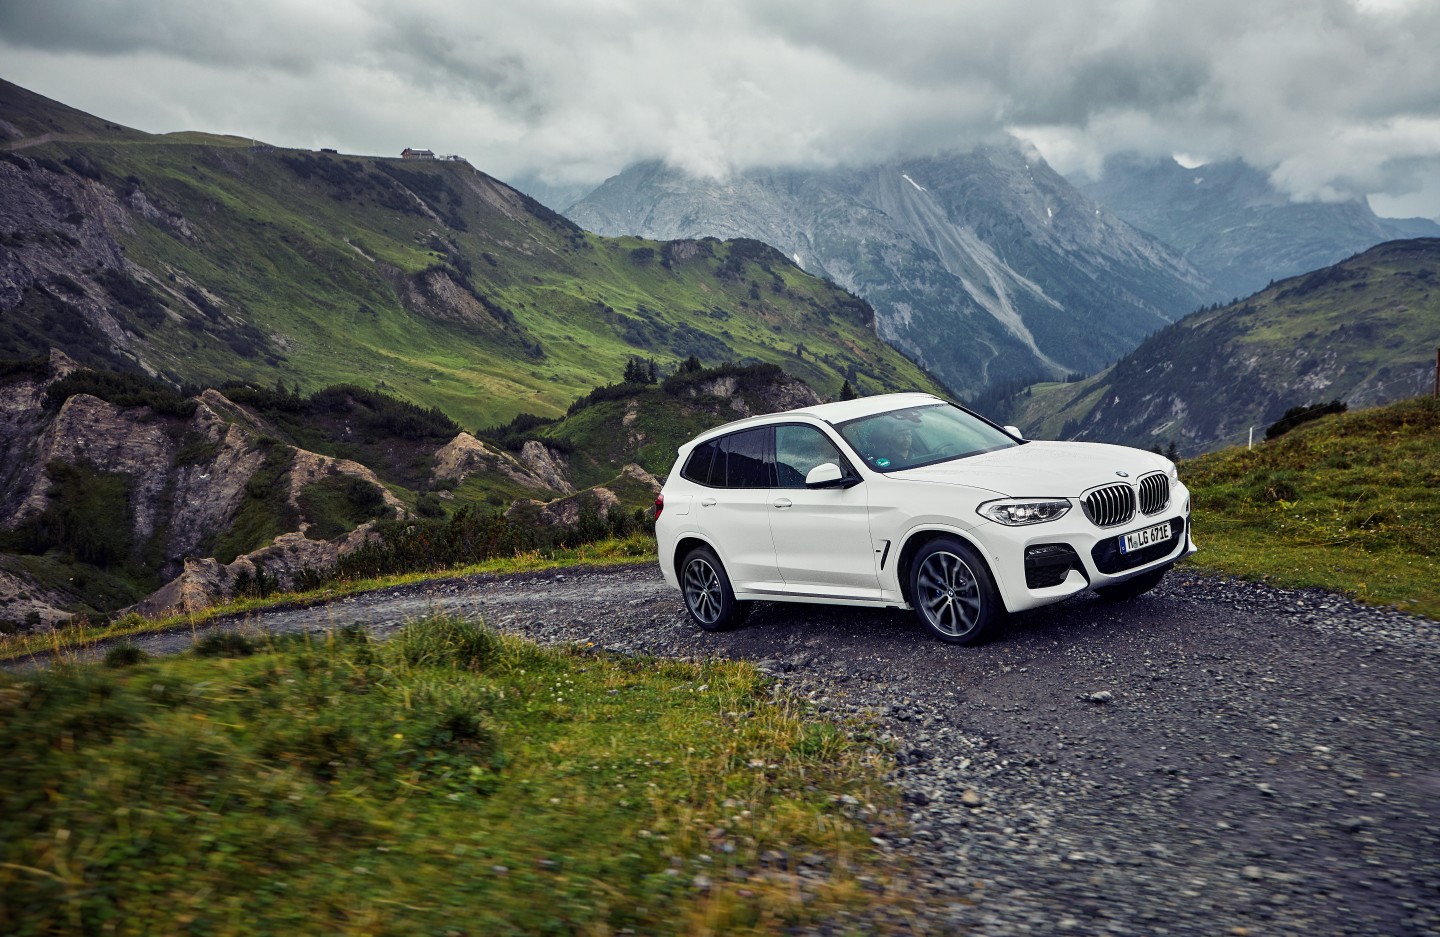 The 2020 BMW X3 Hybrid adds about 40 horsepower to the total output of the standard X3 model